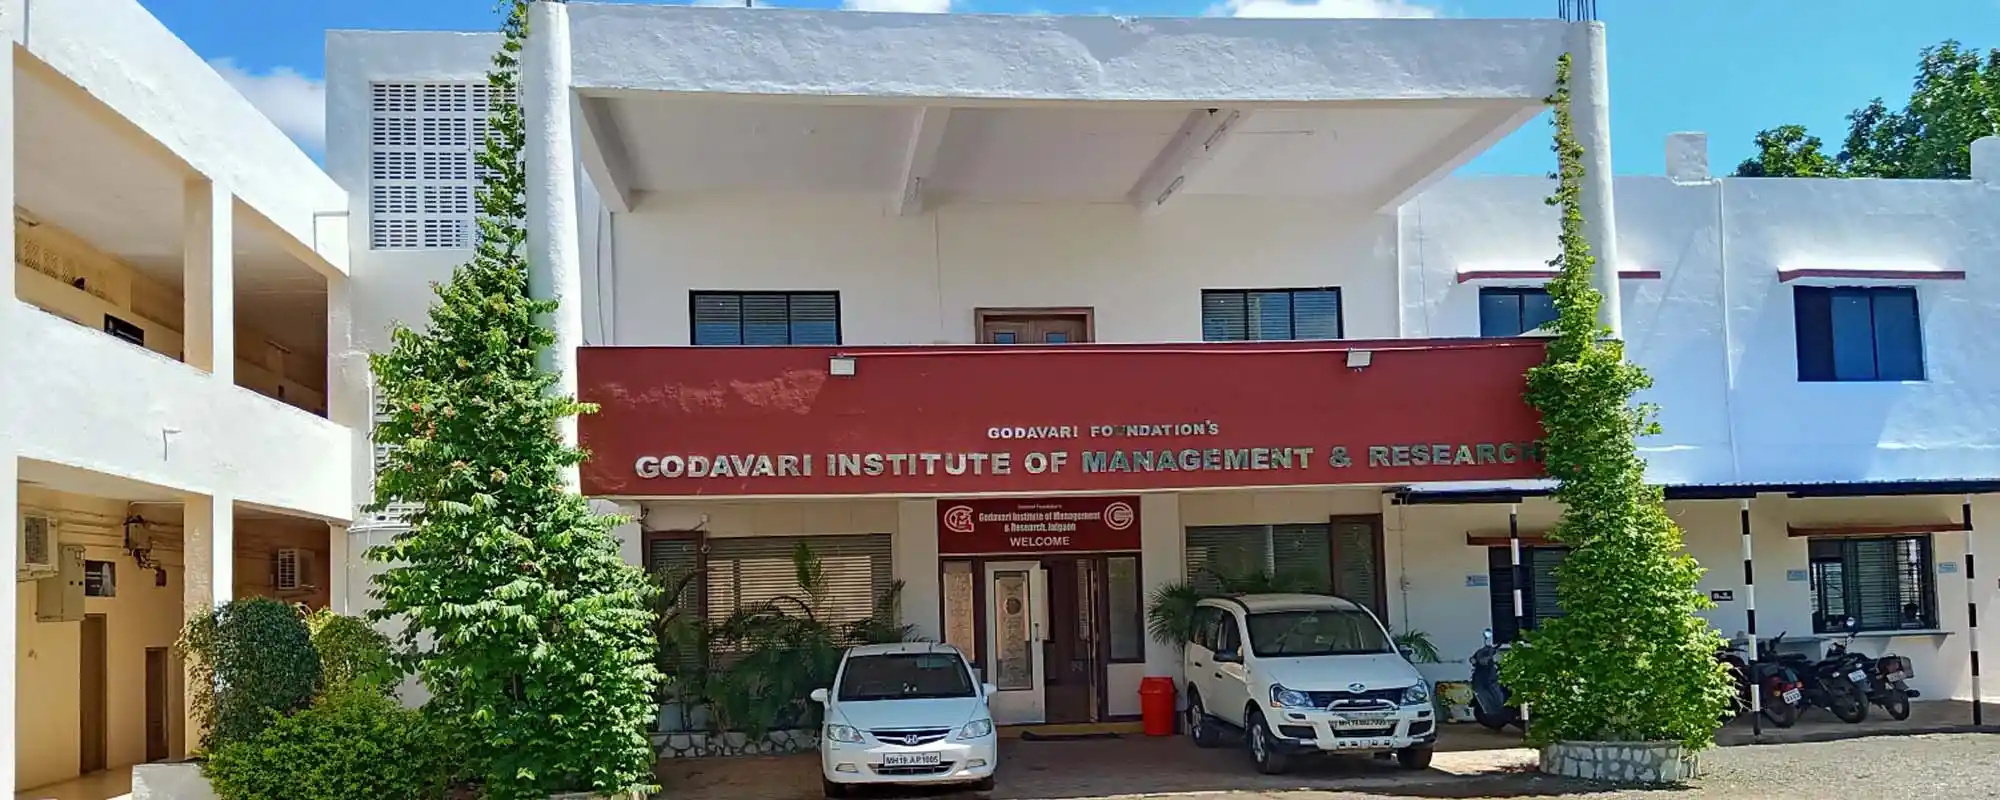 Godavari Institute of Management and Research - [GIMR] Banner